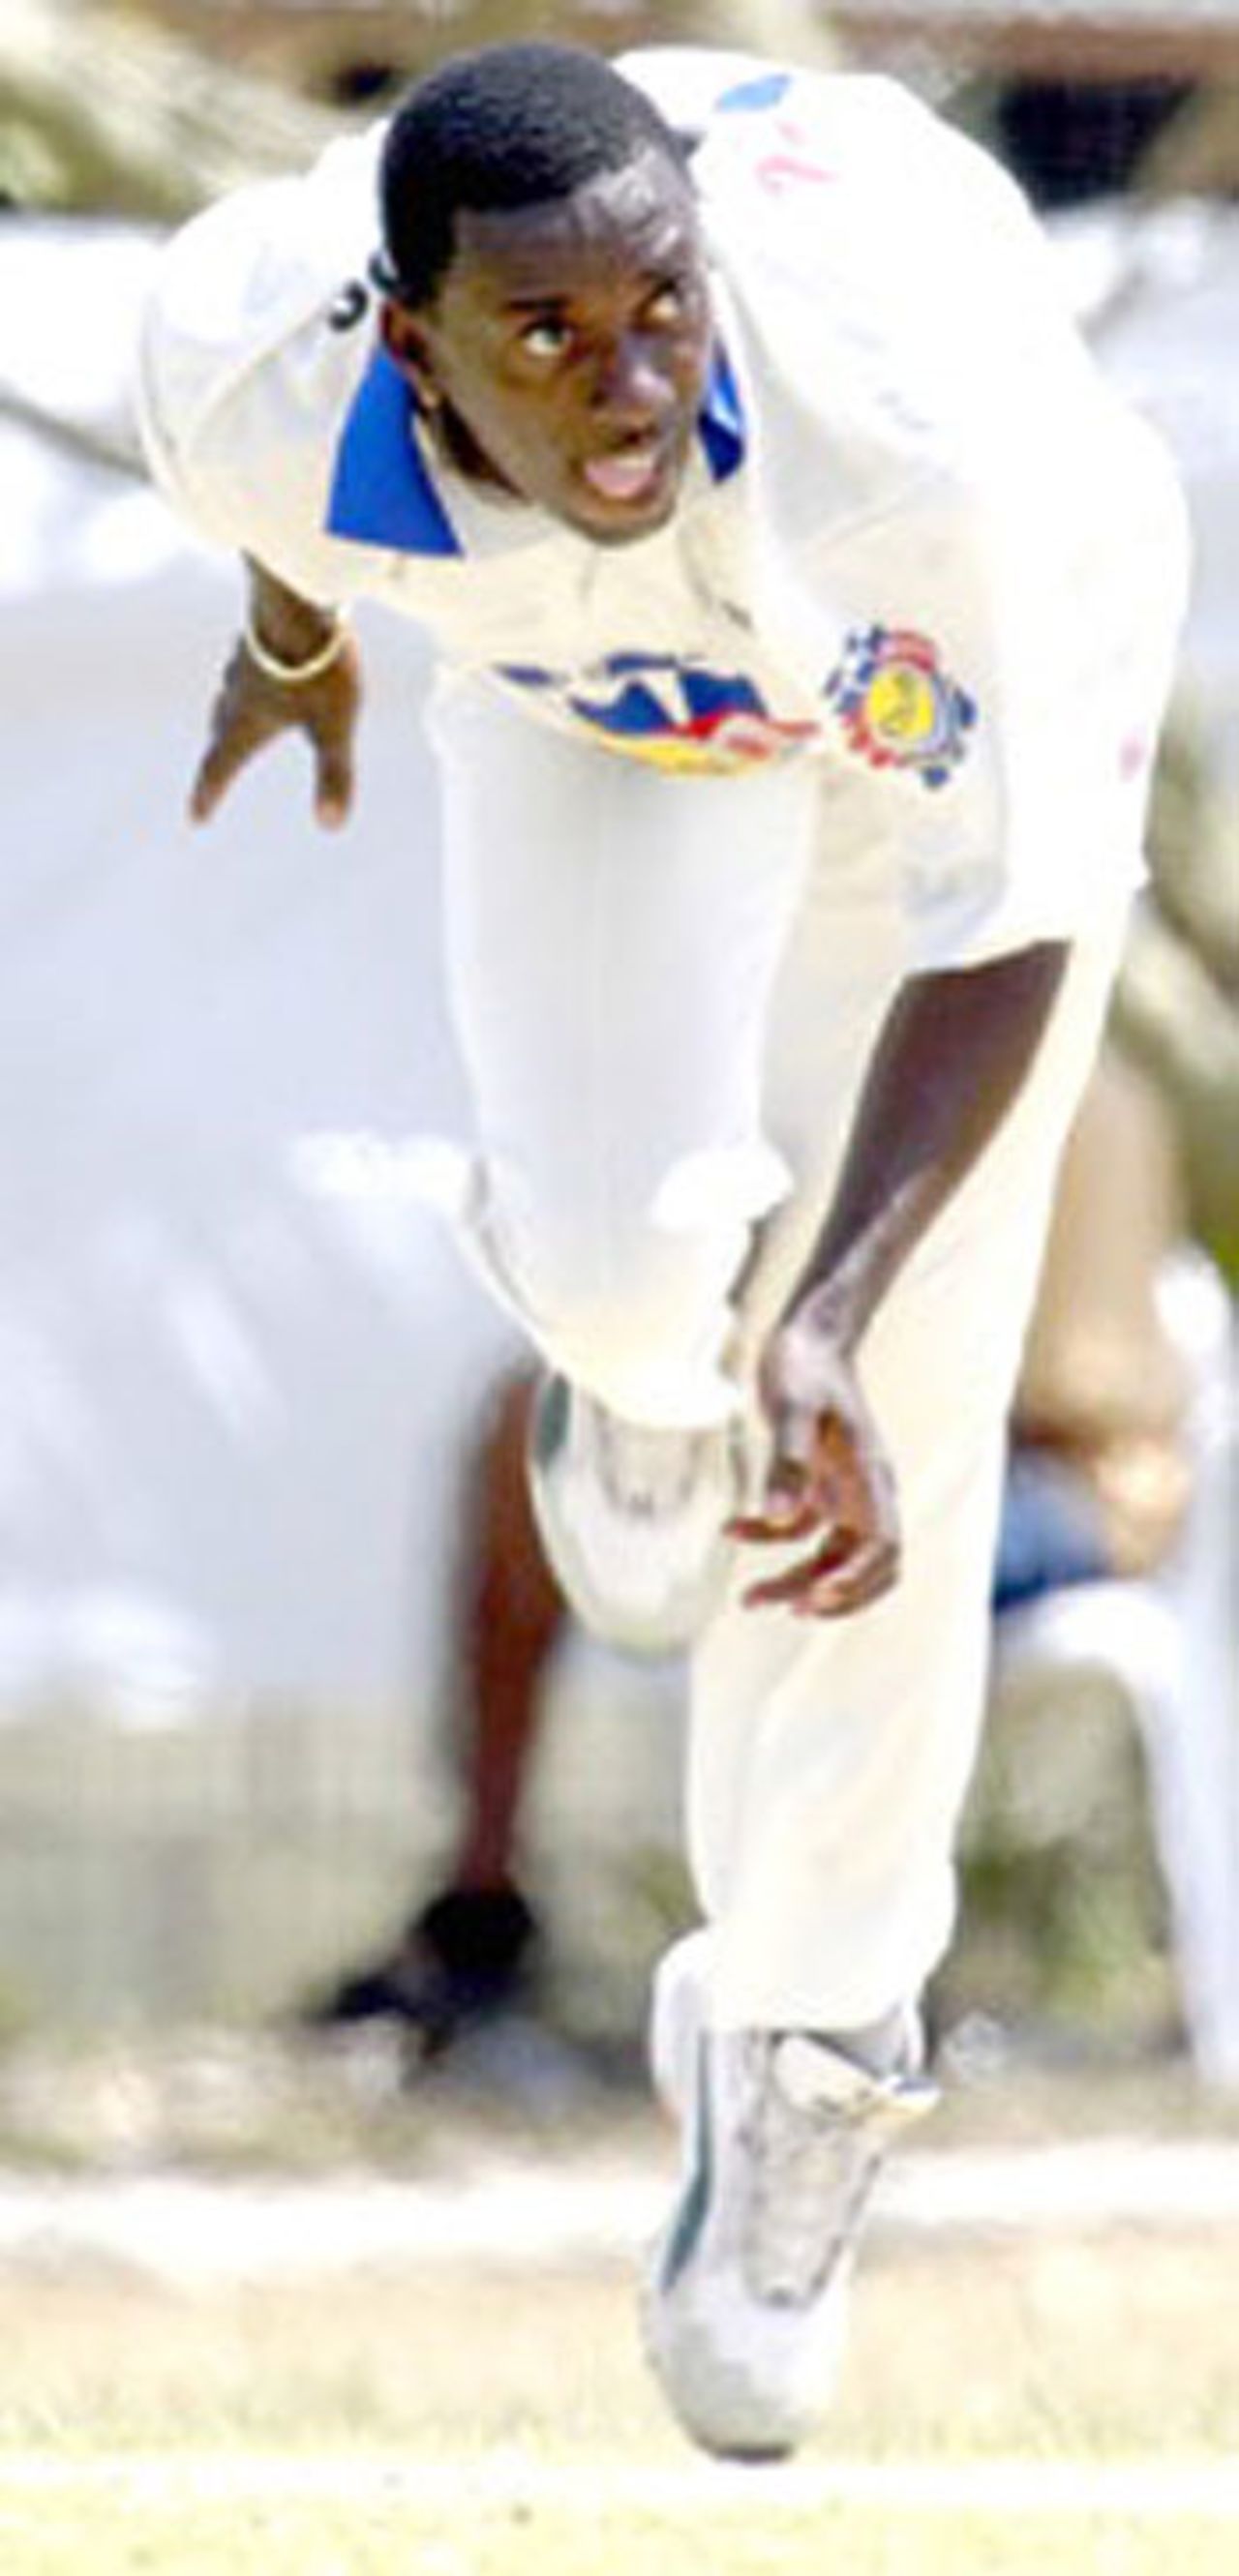 Pedro Collins on his way to 7 for 11 for Barbados, KFC Cup, October 17, 2007